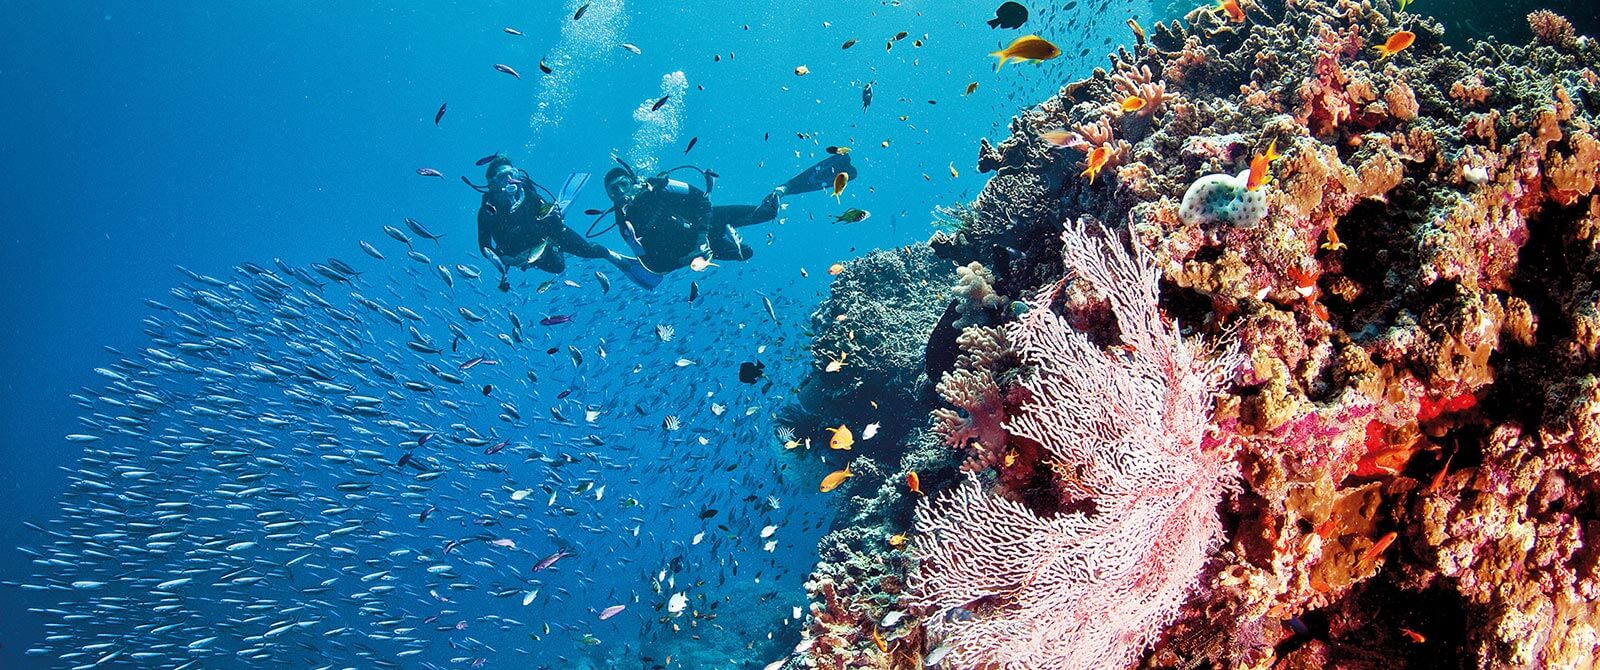 Diving the Great Barrier Reef - Book Your Australia Vacation - Australia Travel Agency